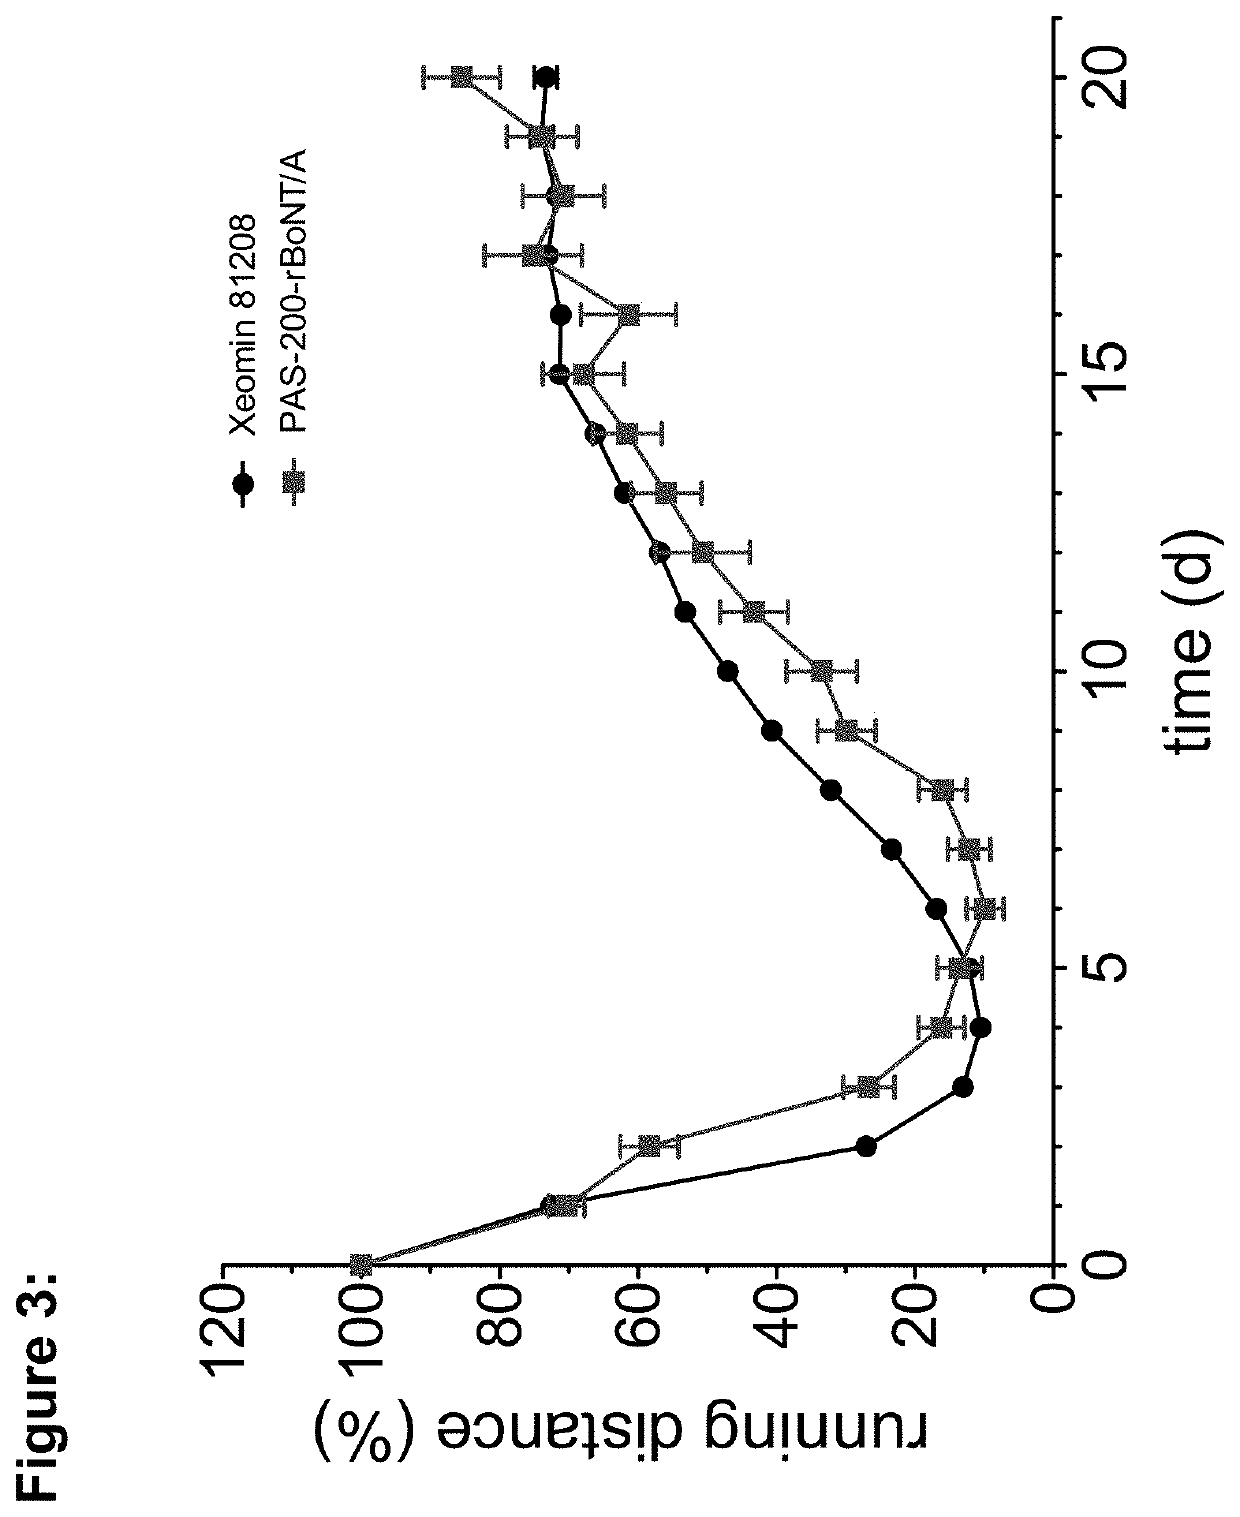 Recombinant clostridial neurotoxins with increased duration of effect